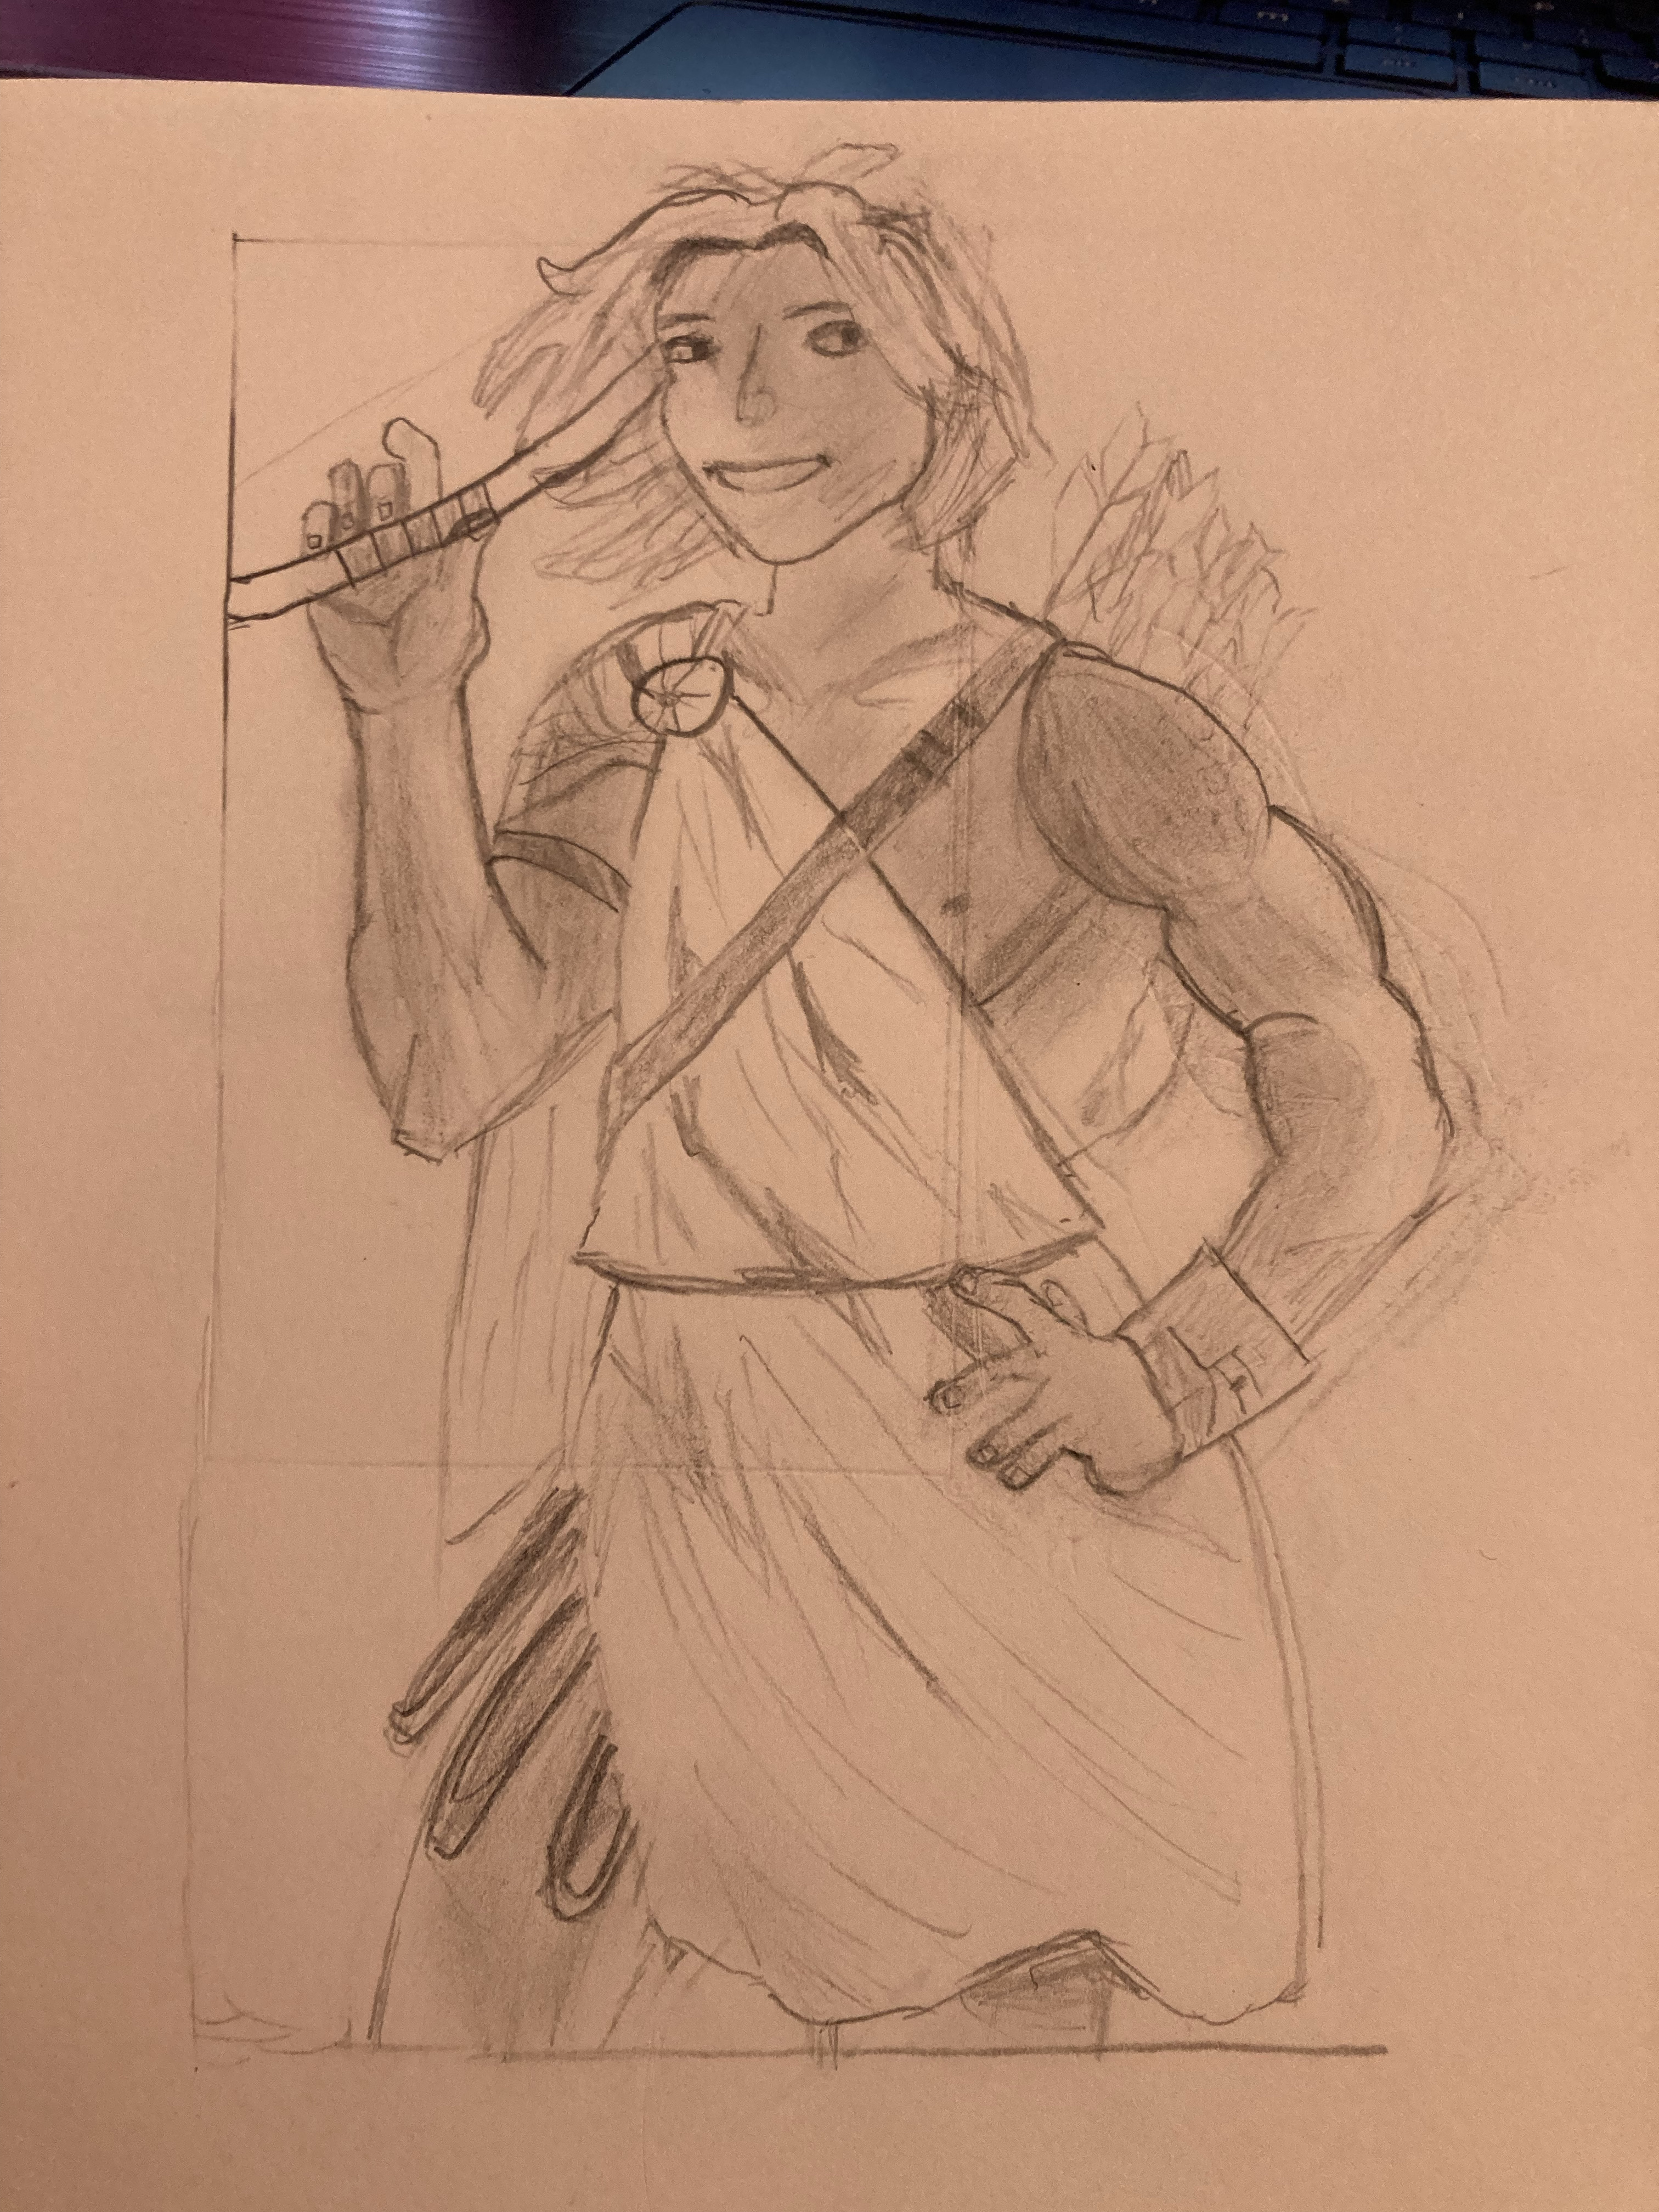 Artwork of a warrior wearing a toga